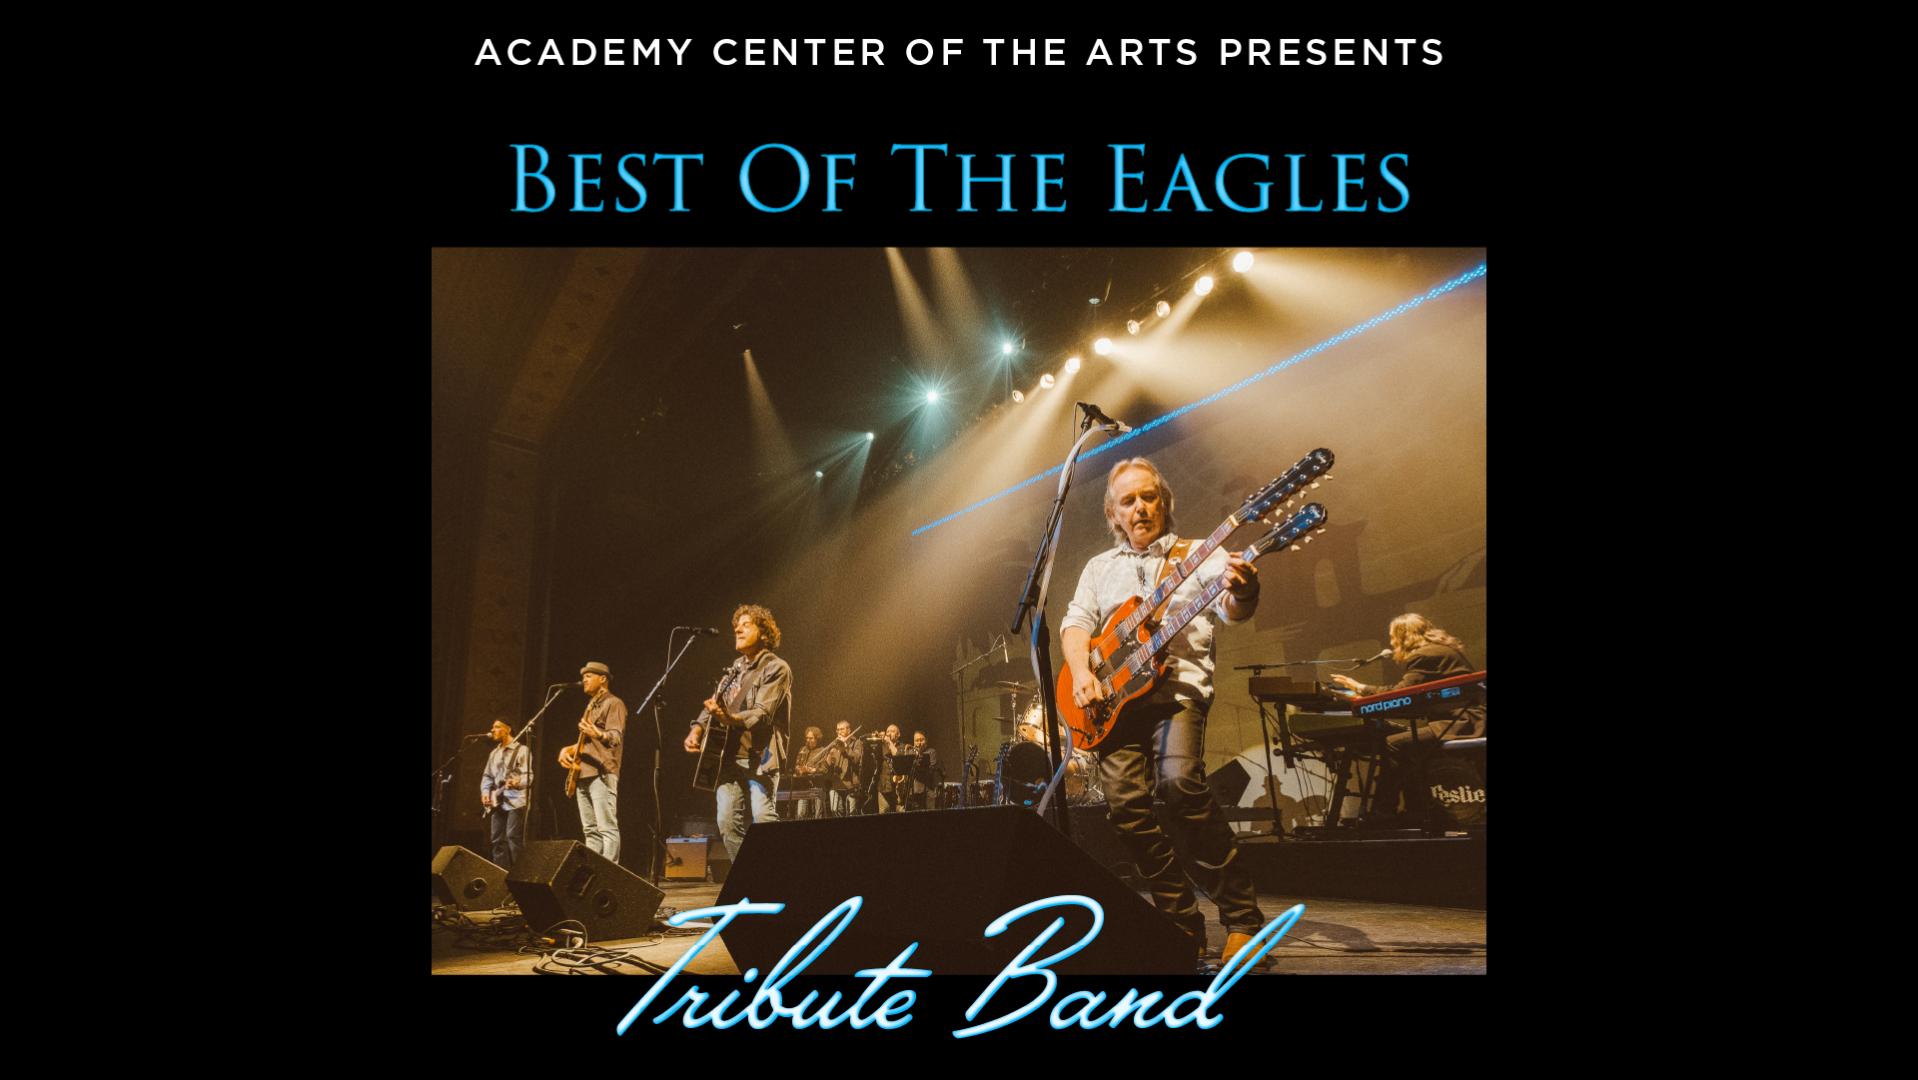 Academy Center of the Arts Presents: Best of the Eagles Tribute Band